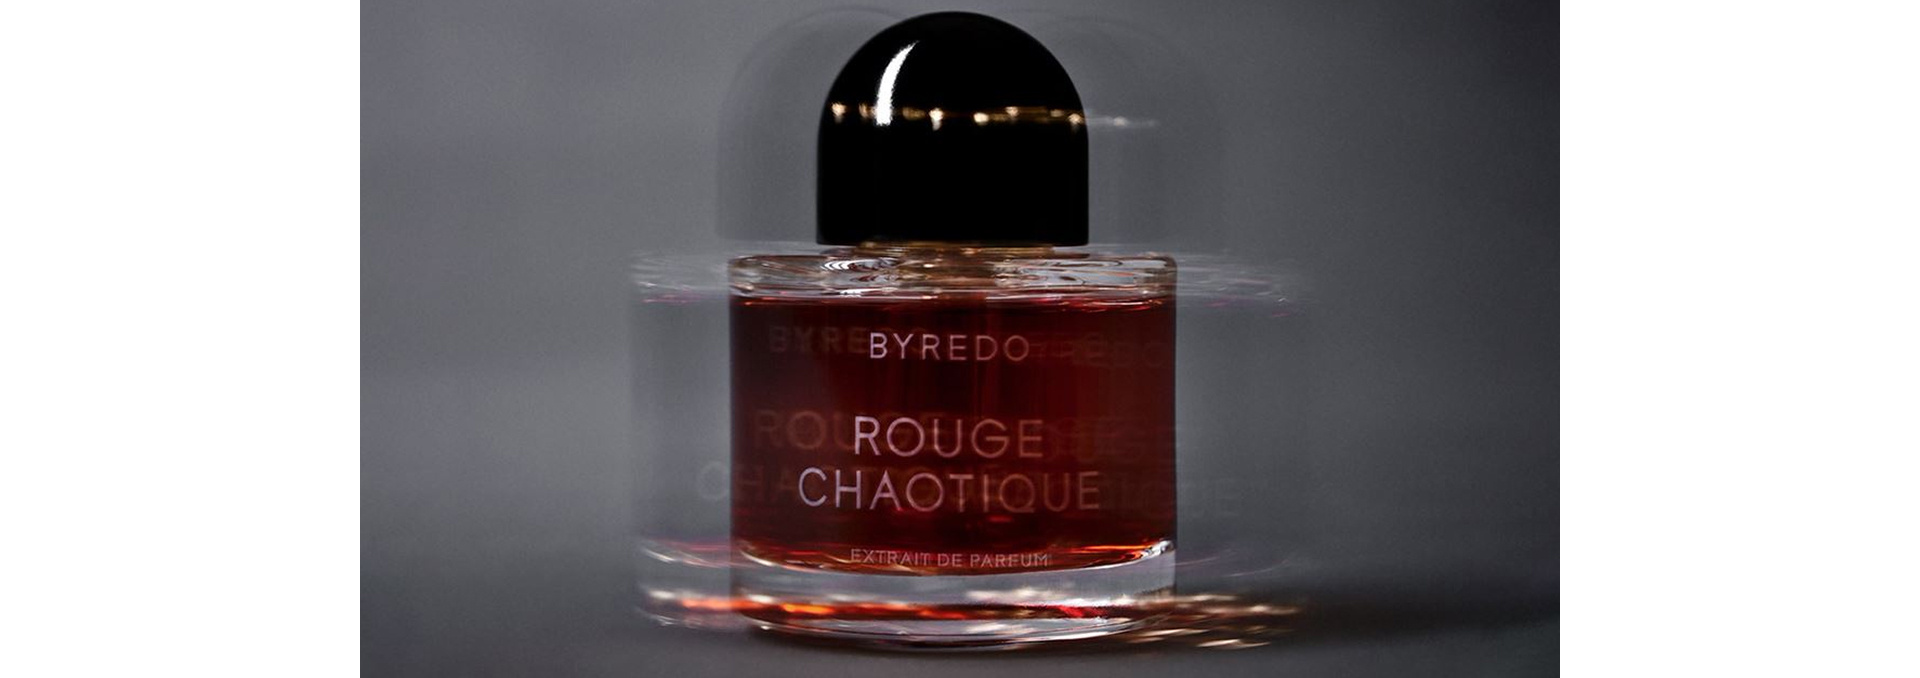 Byredo Night Veils Rouge Chaotique